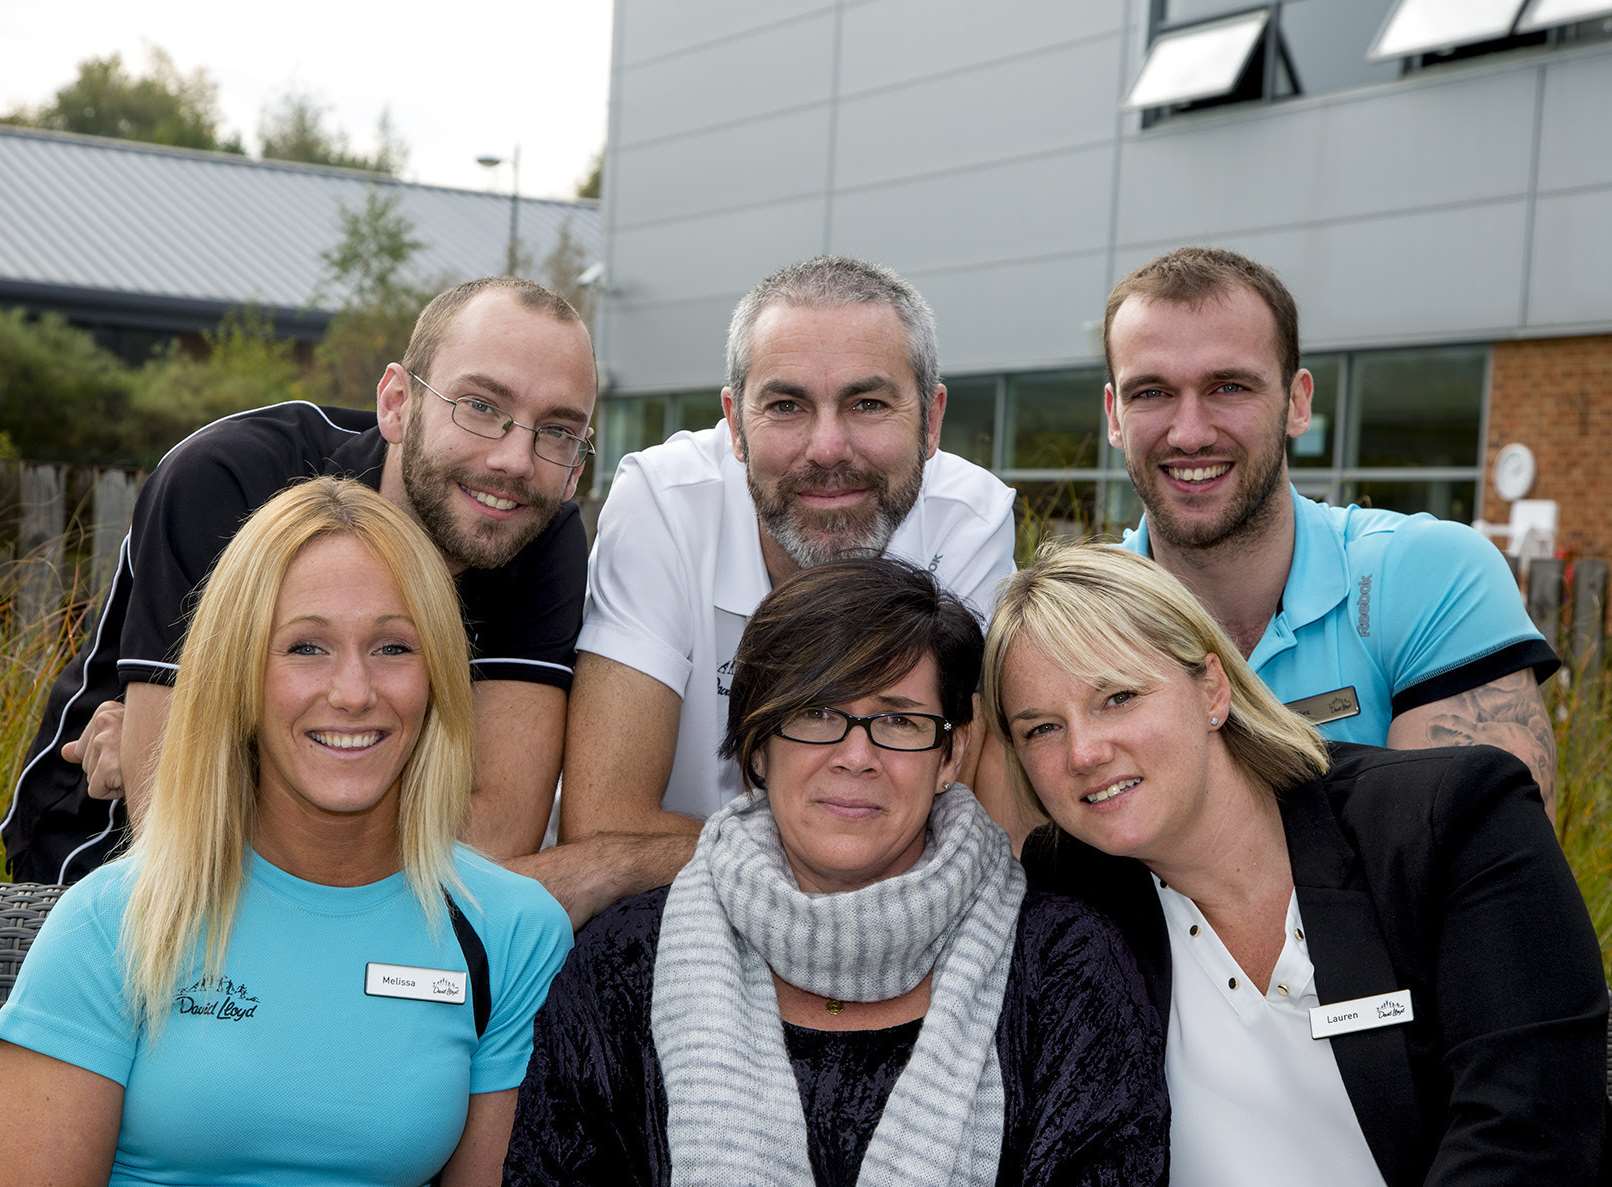 Luisa Pearce (centre) with staff from David Lloyd Gym in Kings Hill who have been helping in her recovery